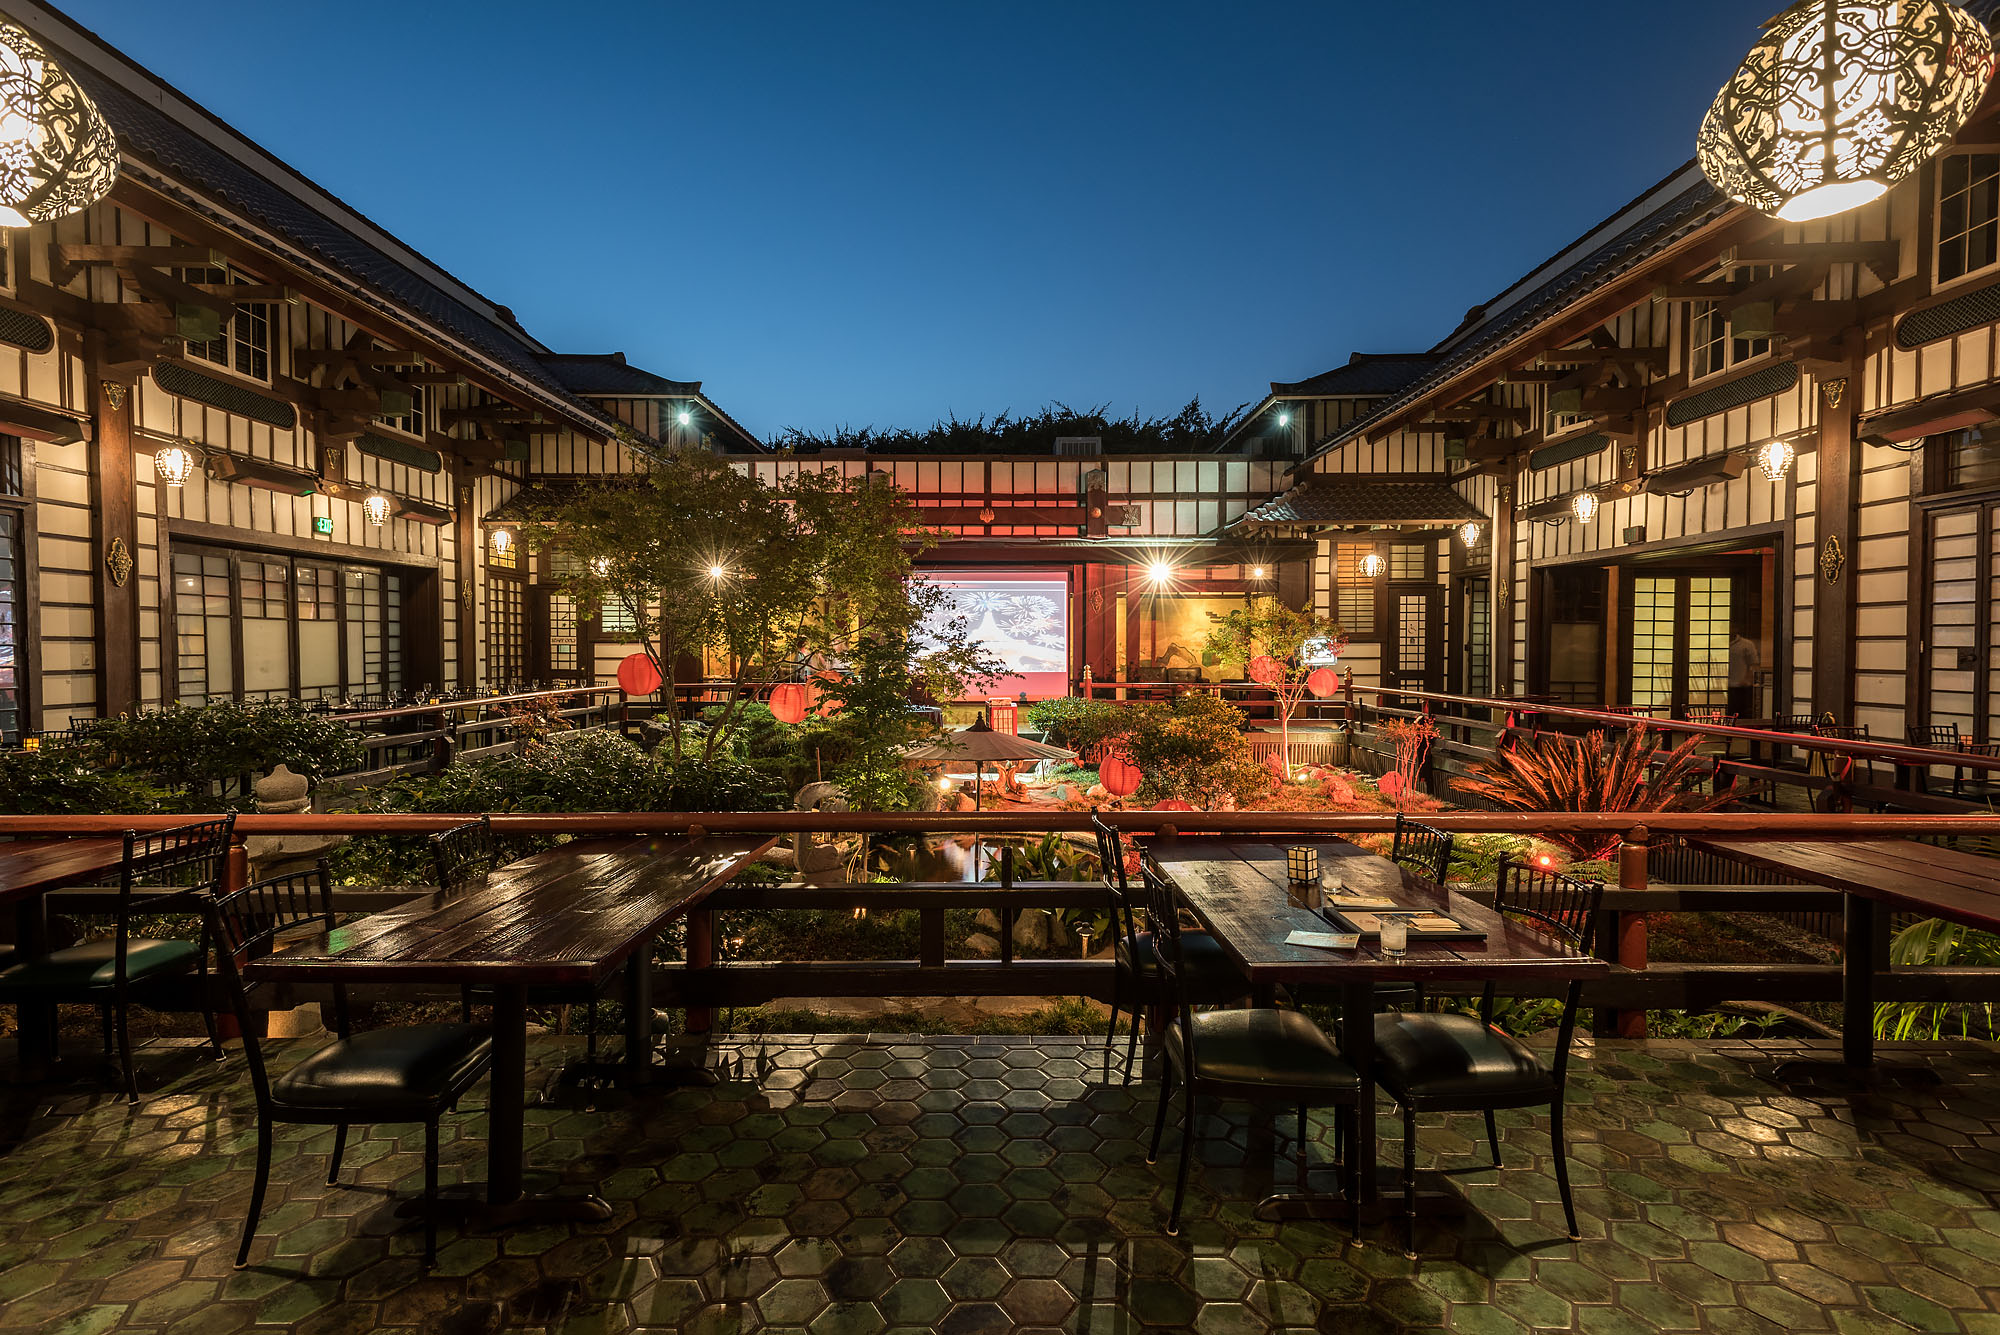 Yamashiro Hollywood’s inner courtyard with lots of wood and carvings and Asian art, shown at dusk.